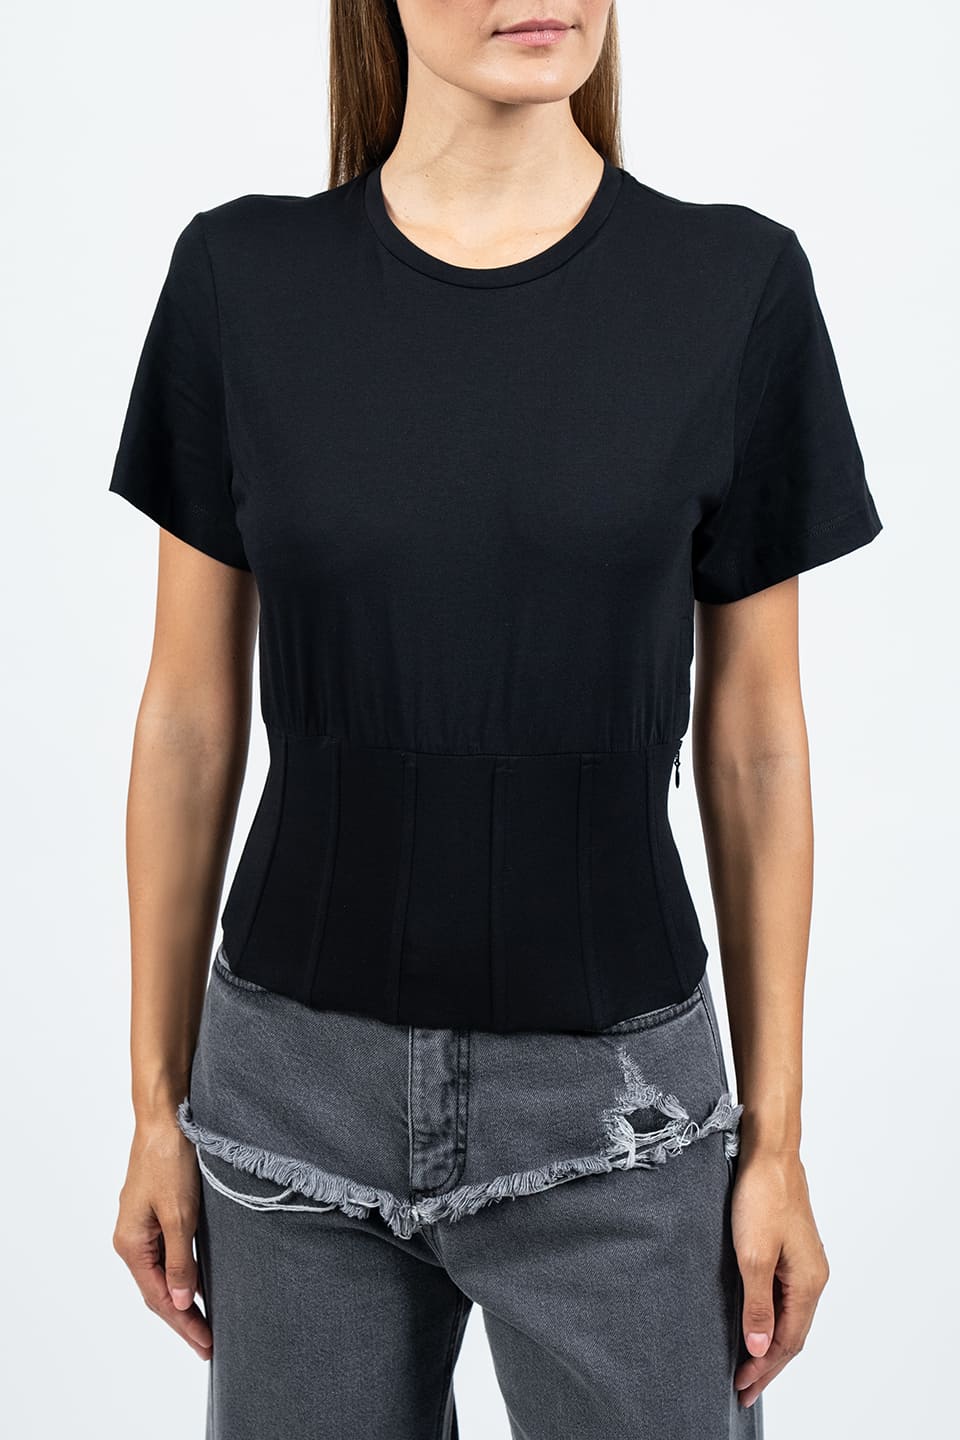 Shop online trendy Black T-shirt from Federica Tosi Fashion designer. Product gallery 1